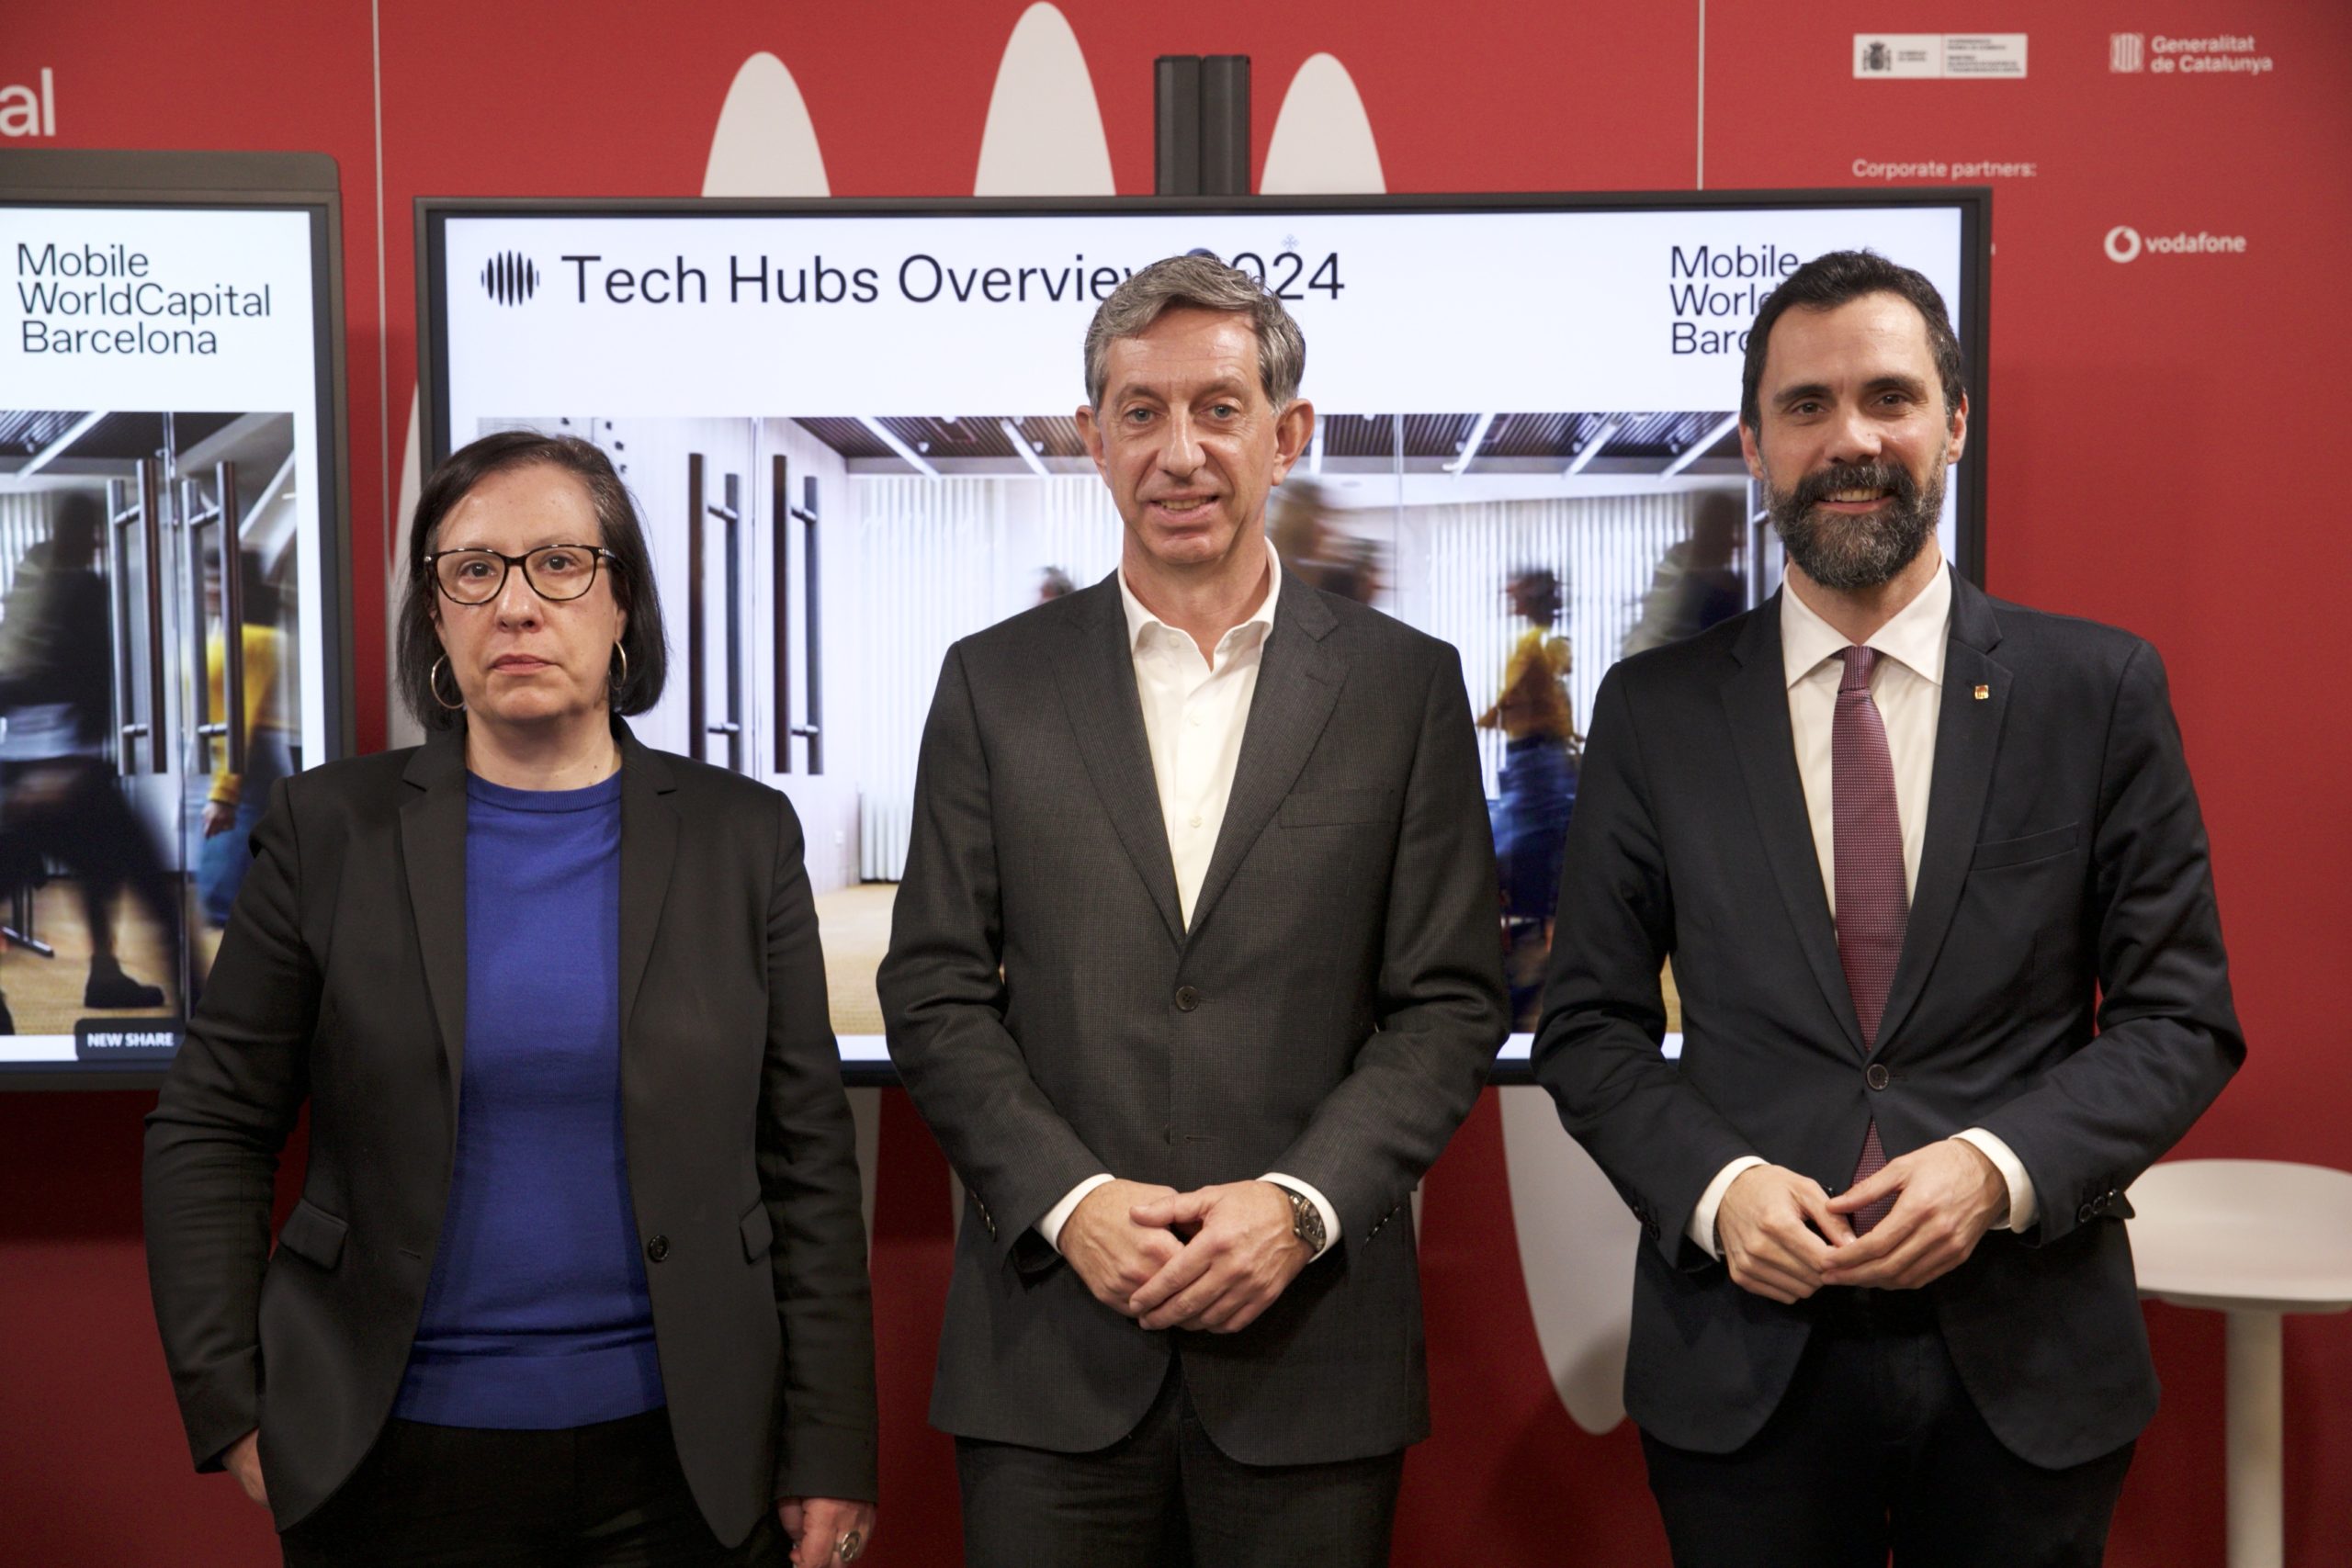 Catalonia reaches a record number of 140 international technology hubs